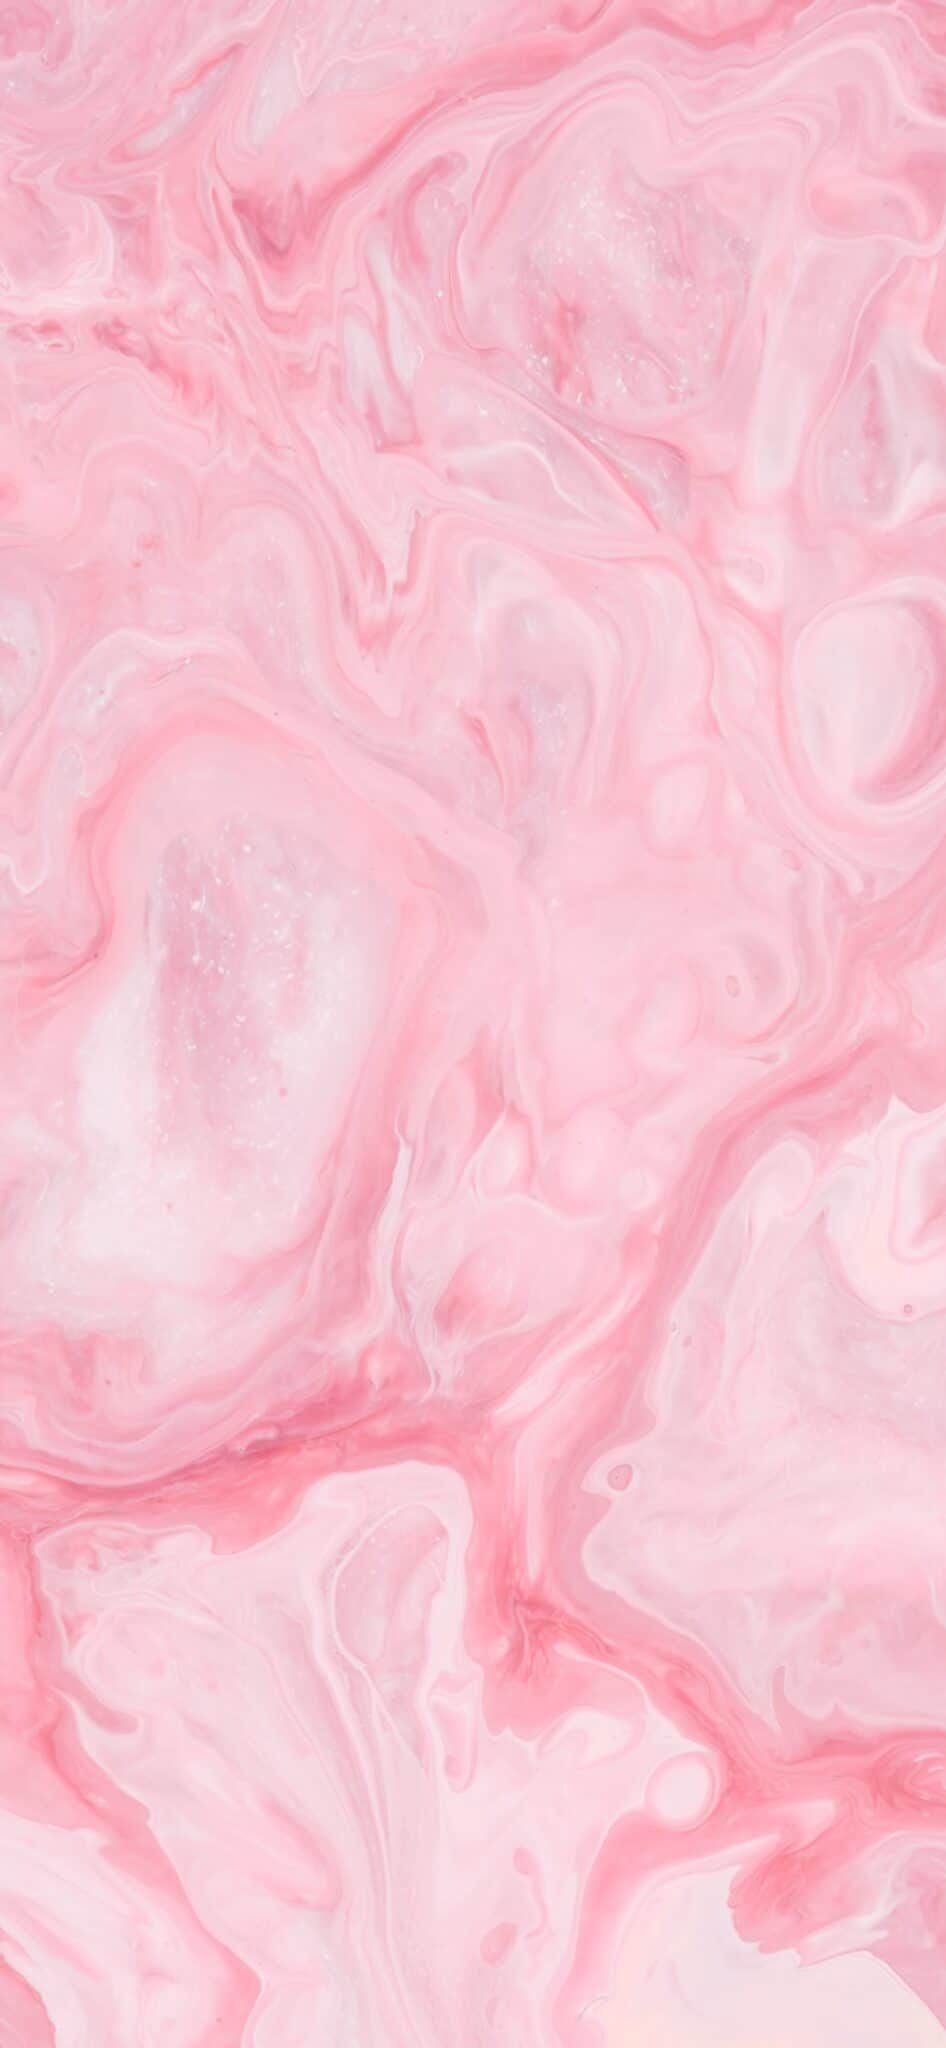 45 Pink Aesthetic Wallpaper Backgrounds You Need For Your Phone Right Now